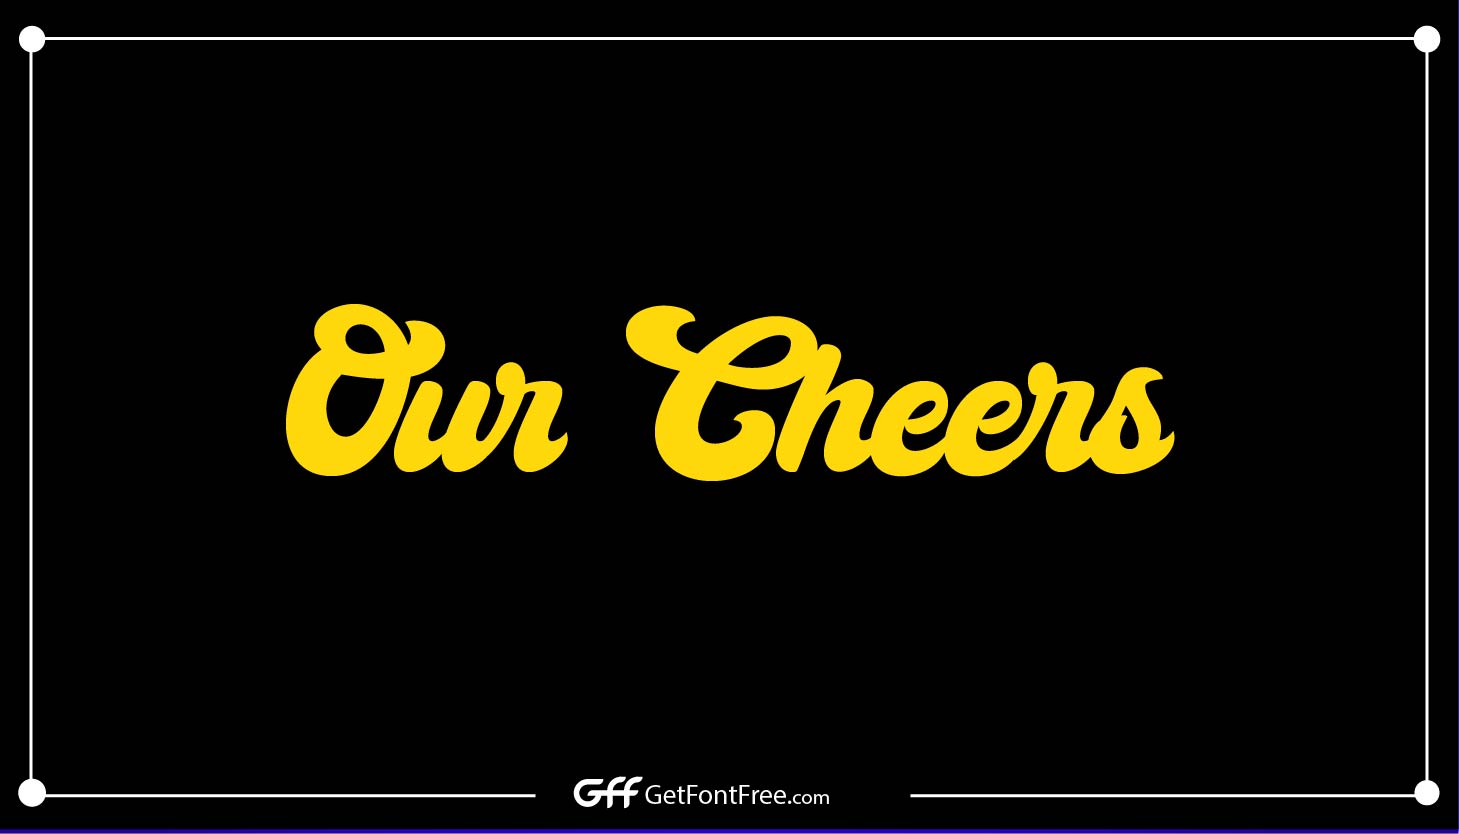 Our Cheers Font-01